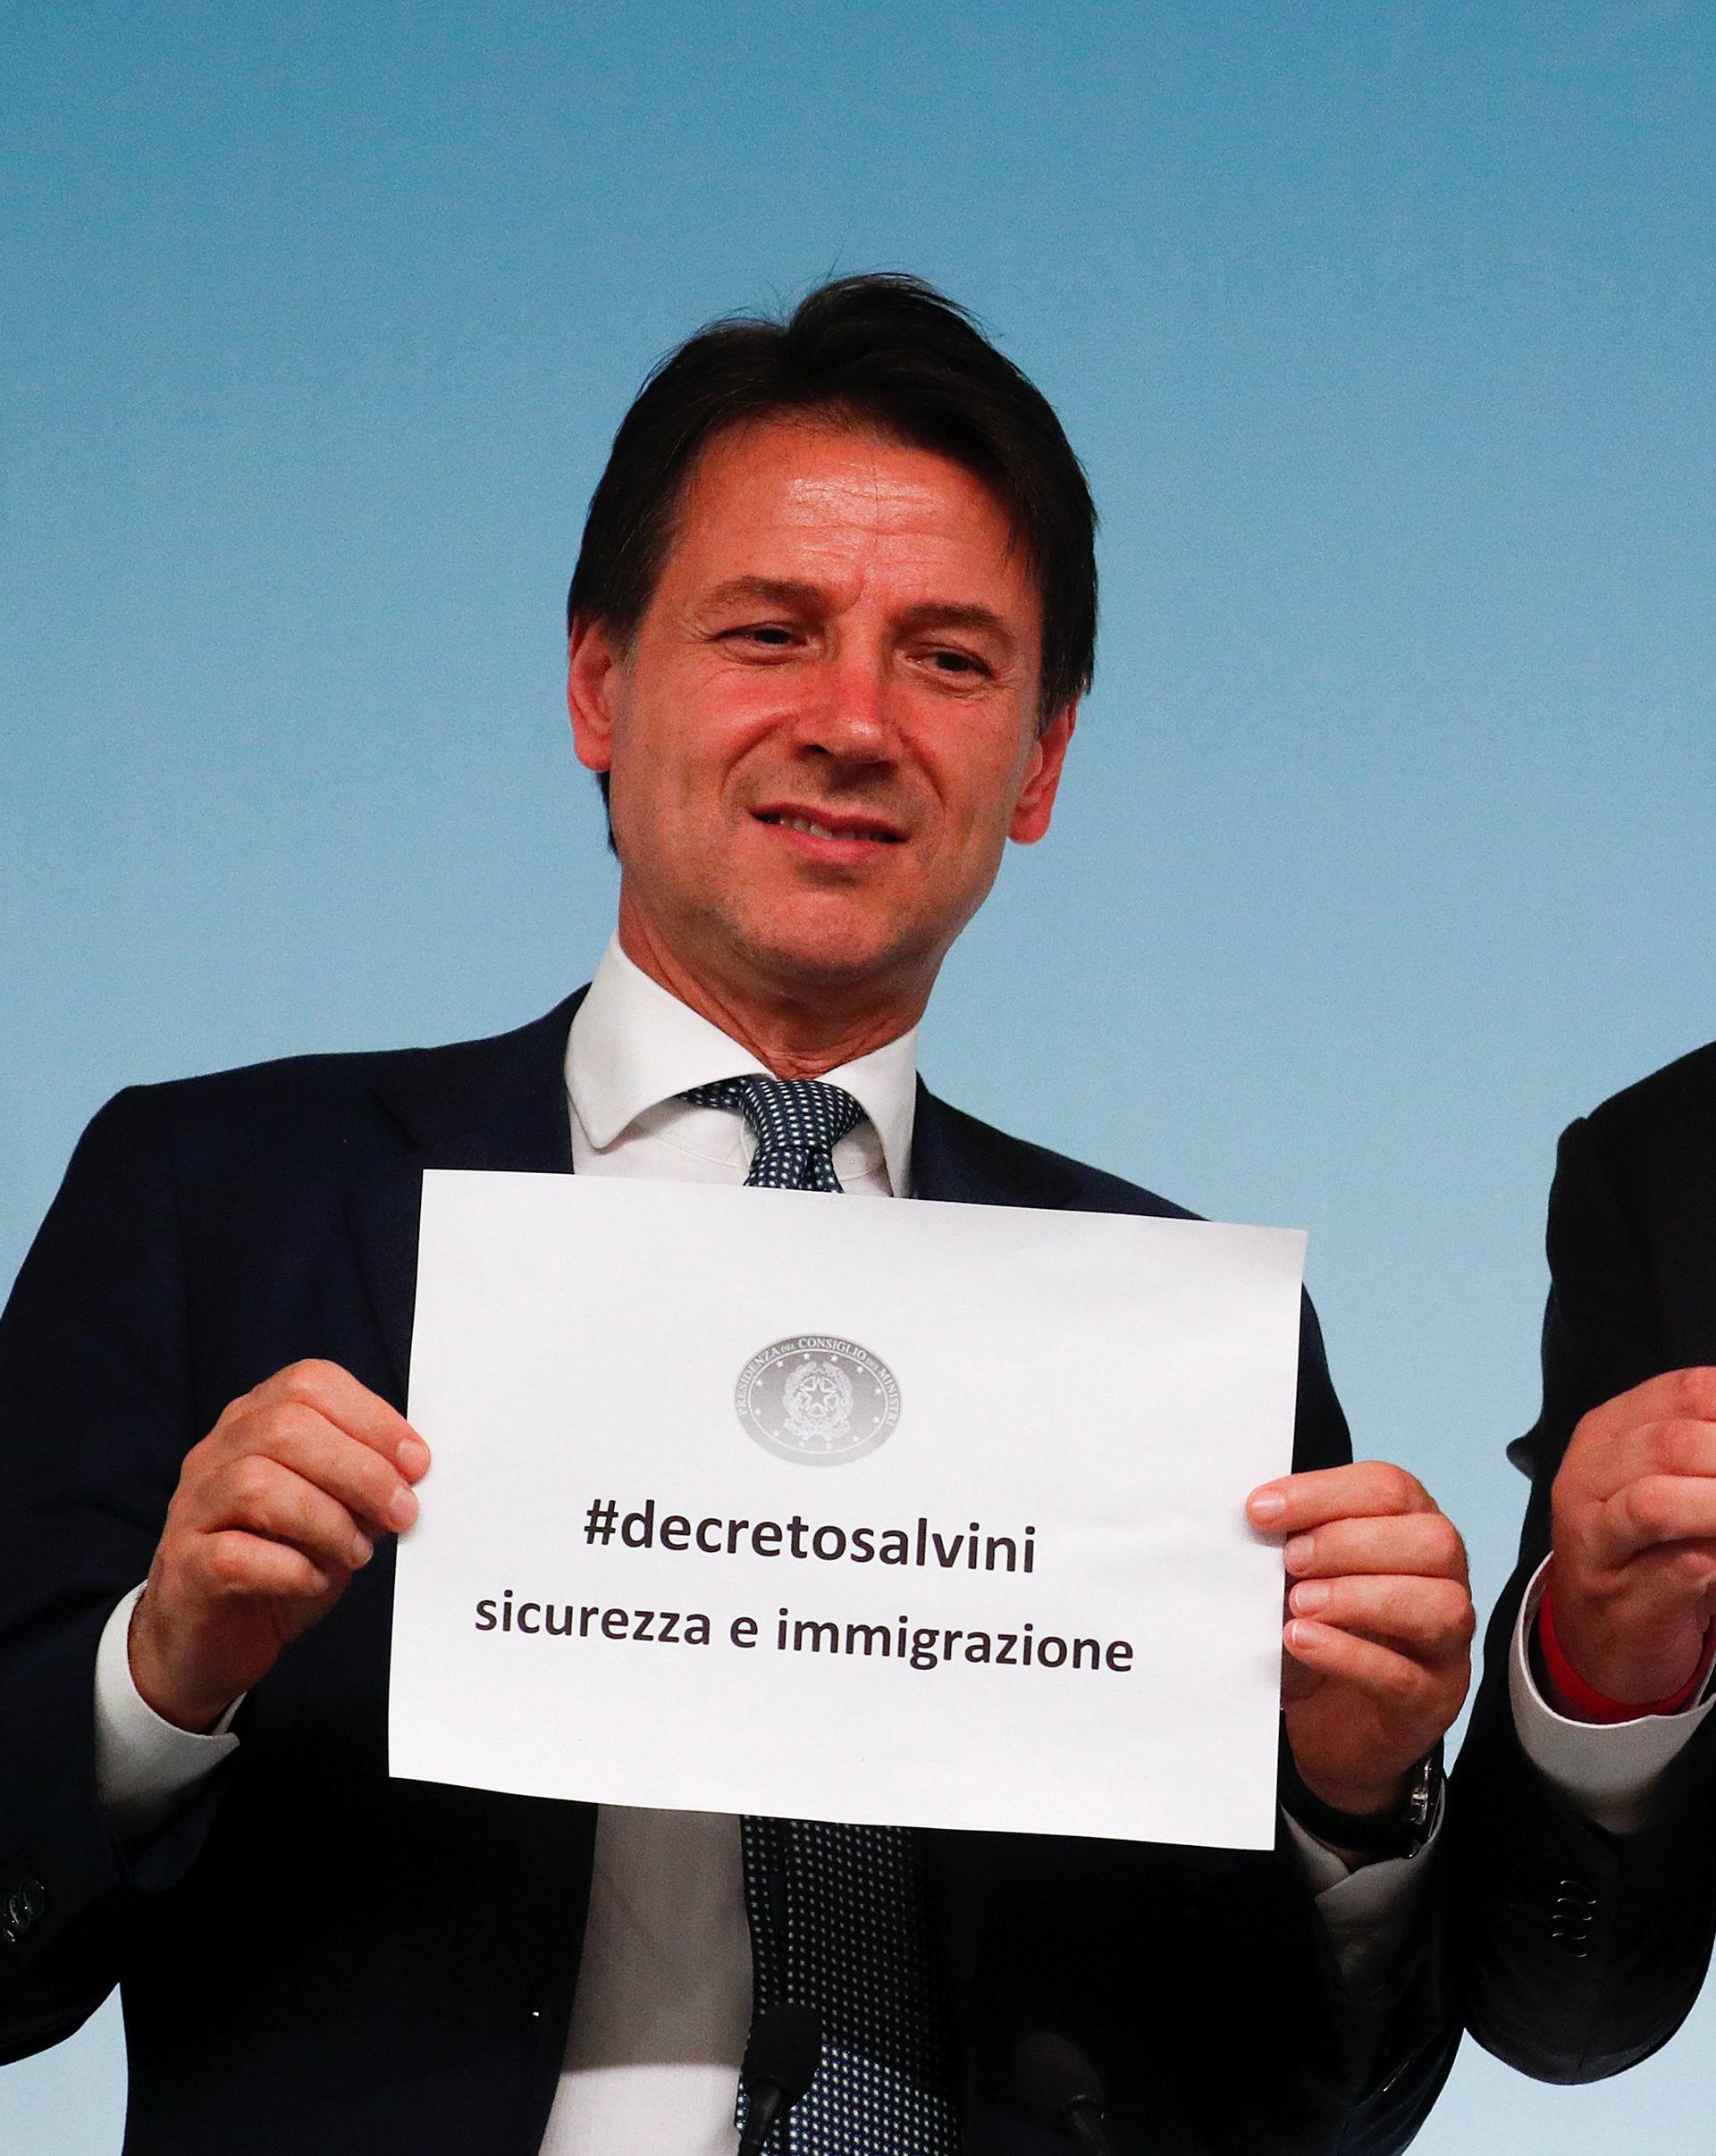 Italy's Prime Minister Conte and Interior Minister Salvini hold up pieces of paper with the name of the new decree written on them during a news conference at Chigi Palace in Rome